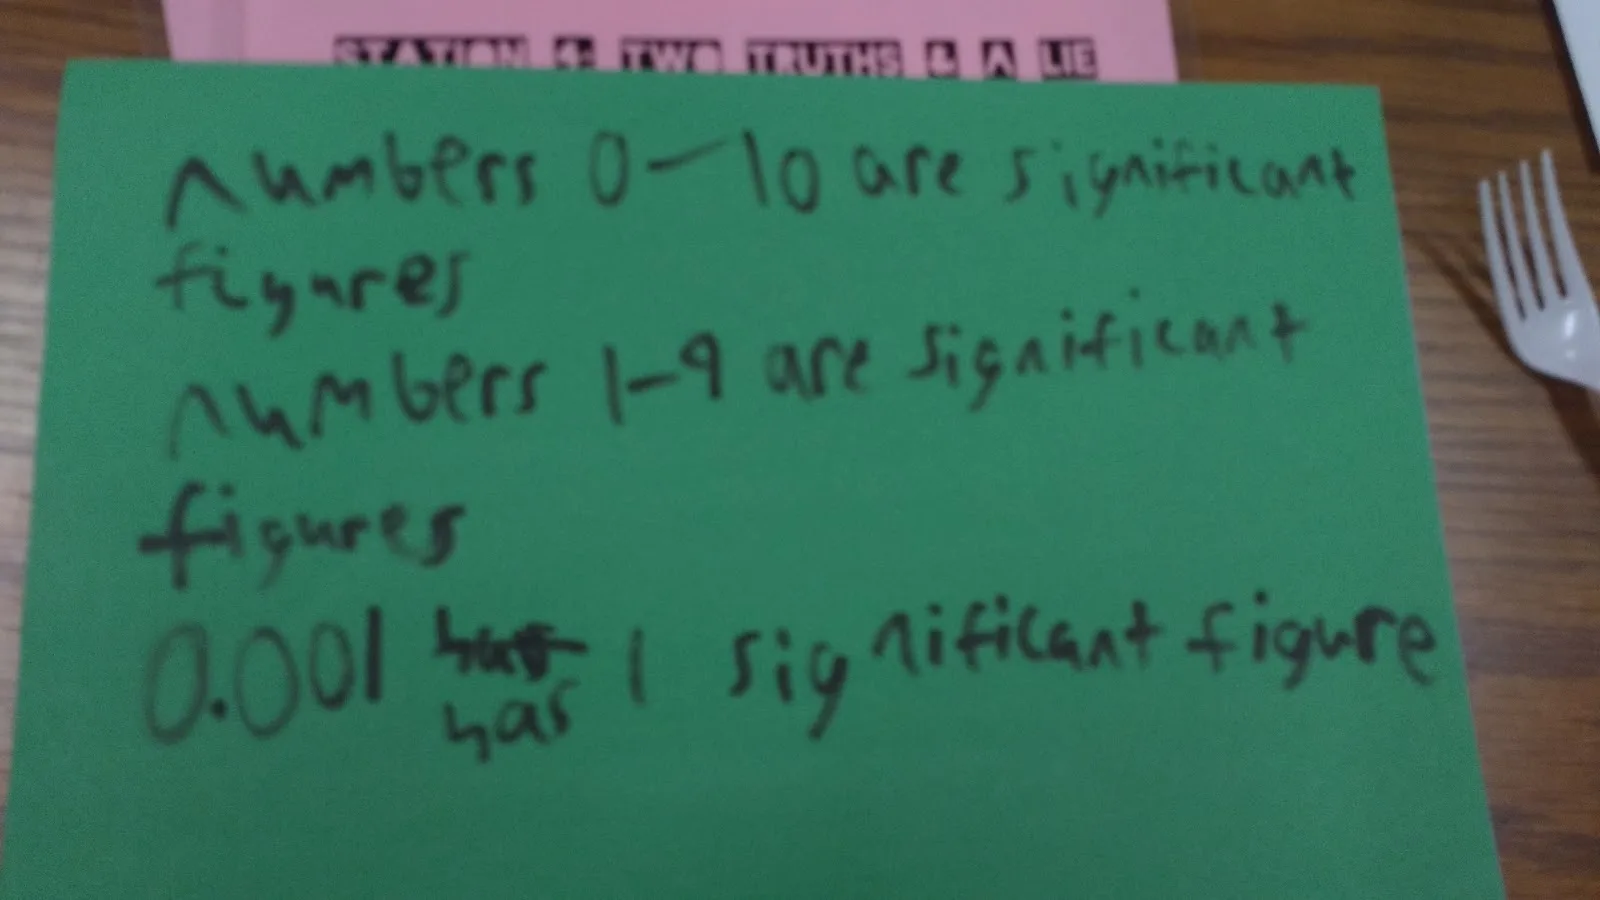 student example of 2 truths and 1 lie for significant figures. 